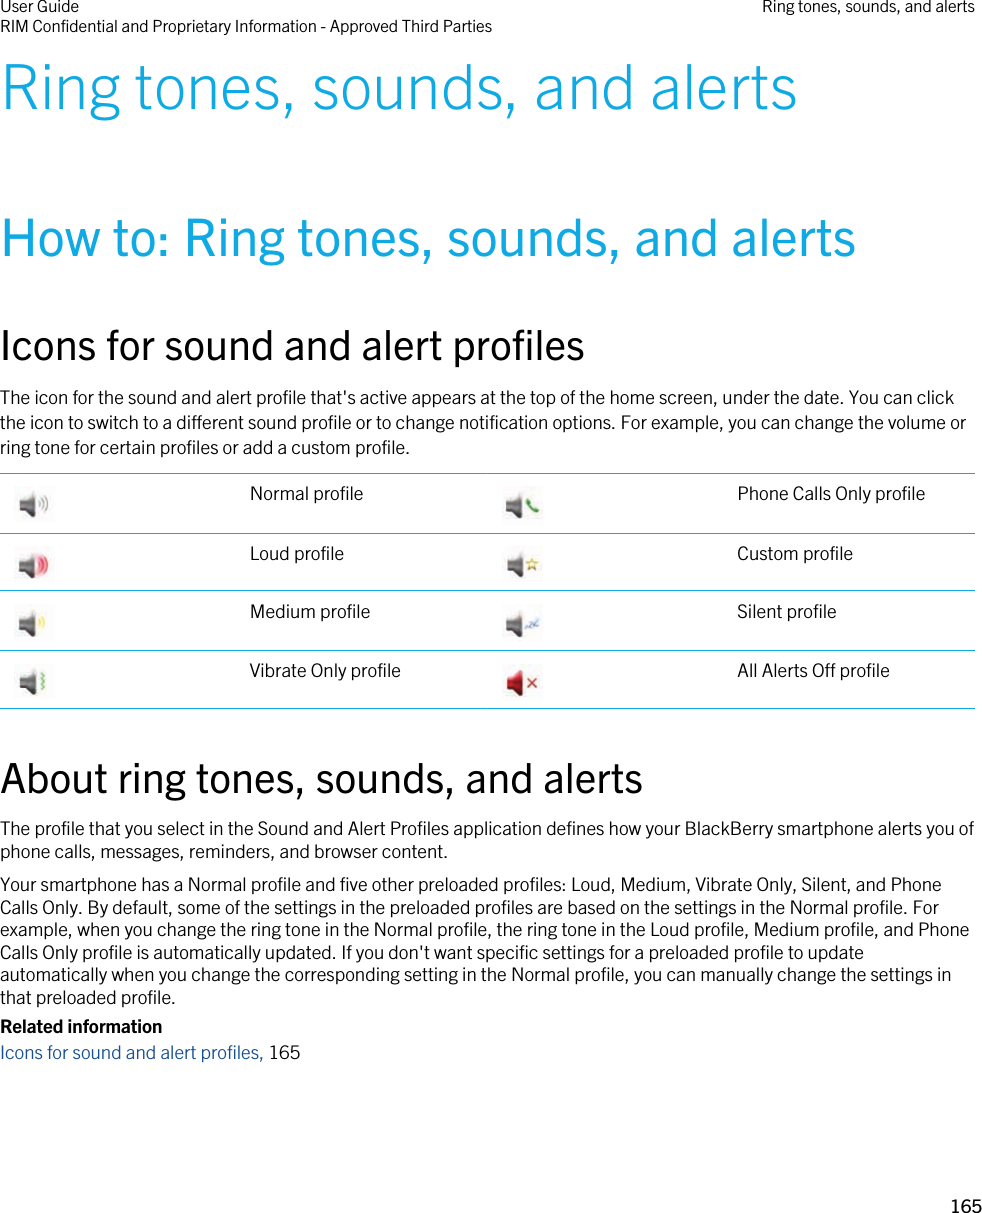 Ring tones, sounds, and alertsHow to: Ring tones, sounds, and alertsIcons for sound and alert profilesThe icon for the sound and alert profile that&apos;s active appears at the top of the home screen, under the date. You can click the icon to switch to a different sound profile or to change notification options. For example, you can change the volume or ring tone for certain profiles or add a custom profile. Normal profile  Phone Calls Only profile Loud profile  Custom profile Medium profile  Silent profile Vibrate Only profile  All Alerts Off profileAbout ring tones, sounds, and alertsThe profile that you select in the Sound and Alert Profiles application defines how your BlackBerry smartphone alerts you of phone calls, messages, reminders, and browser content.Your smartphone has a Normal profile and five other preloaded profiles: Loud, Medium, Vibrate Only, Silent, and Phone Calls Only. By default, some of the settings in the preloaded profiles are based on the settings in the Normal profile. For example, when you change the ring tone in the Normal profile, the ring tone in the Loud profile, Medium profile, and Phone Calls Only profile is automatically updated. If you don&apos;t want specific settings for a preloaded profile to update automatically when you change the corresponding setting in the Normal profile, you can manually change the settings in that preloaded profile.Related informationIcons for sound and alert profiles, 165 User GuideRIM Confidential and Proprietary Information - Approved Third Parties Ring tones, sounds, and alerts165 